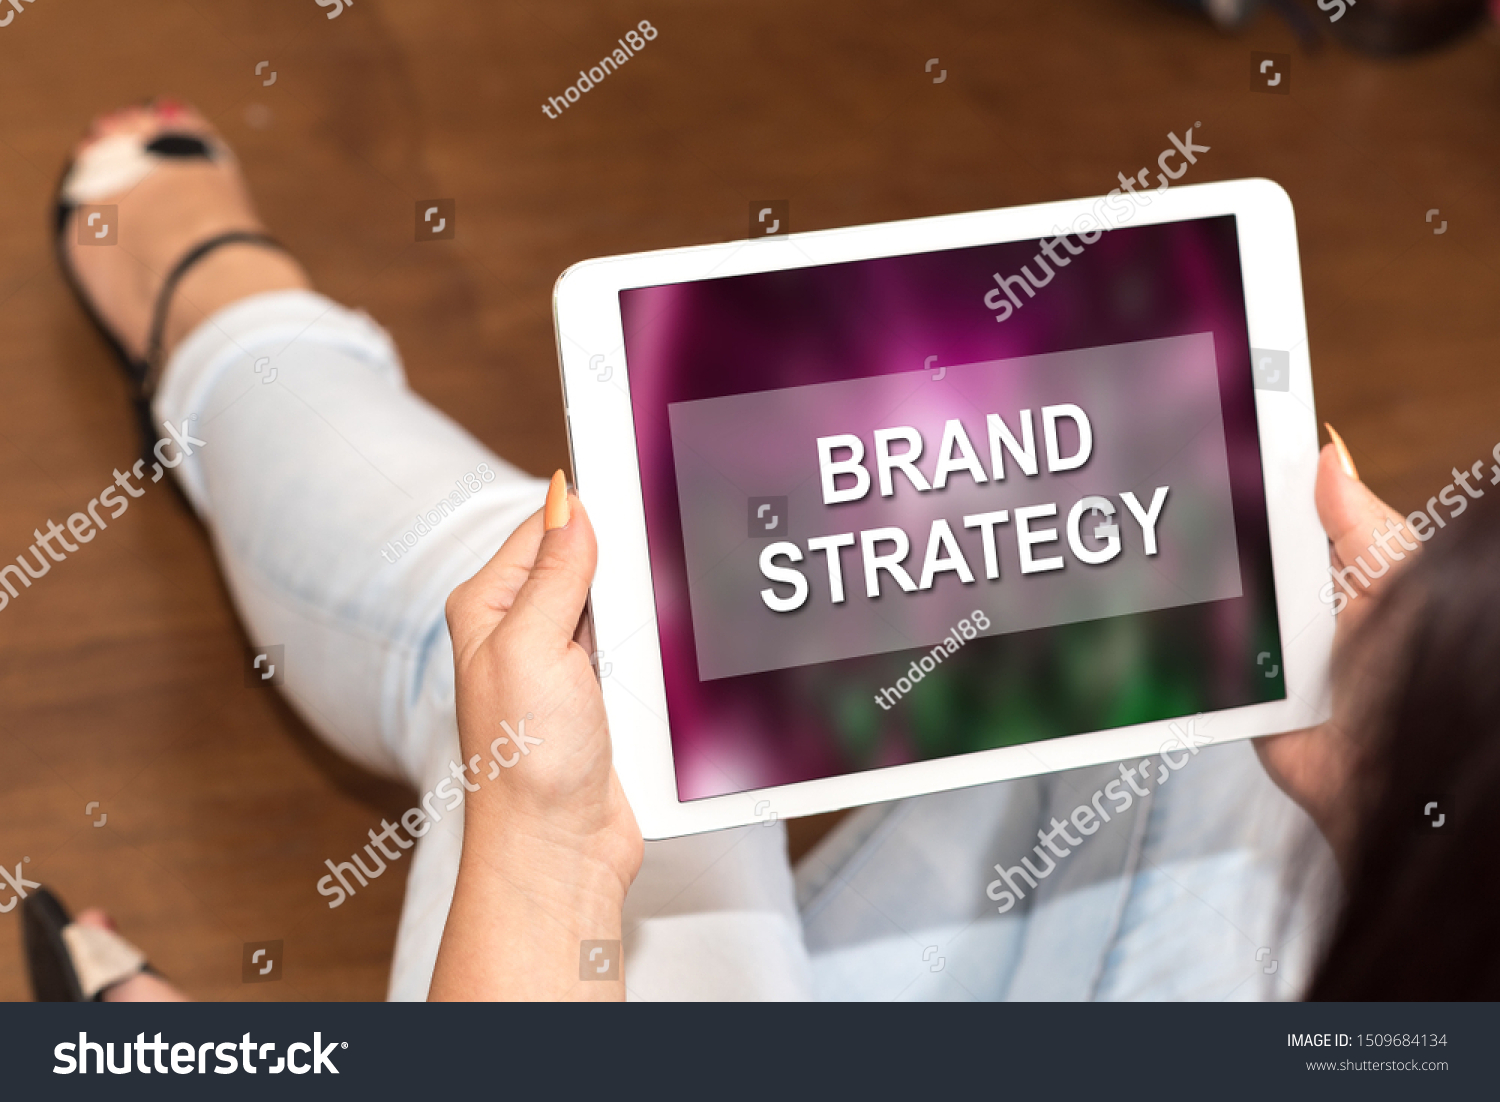 Tablet screen displaying a brand strategy concept #1509684134